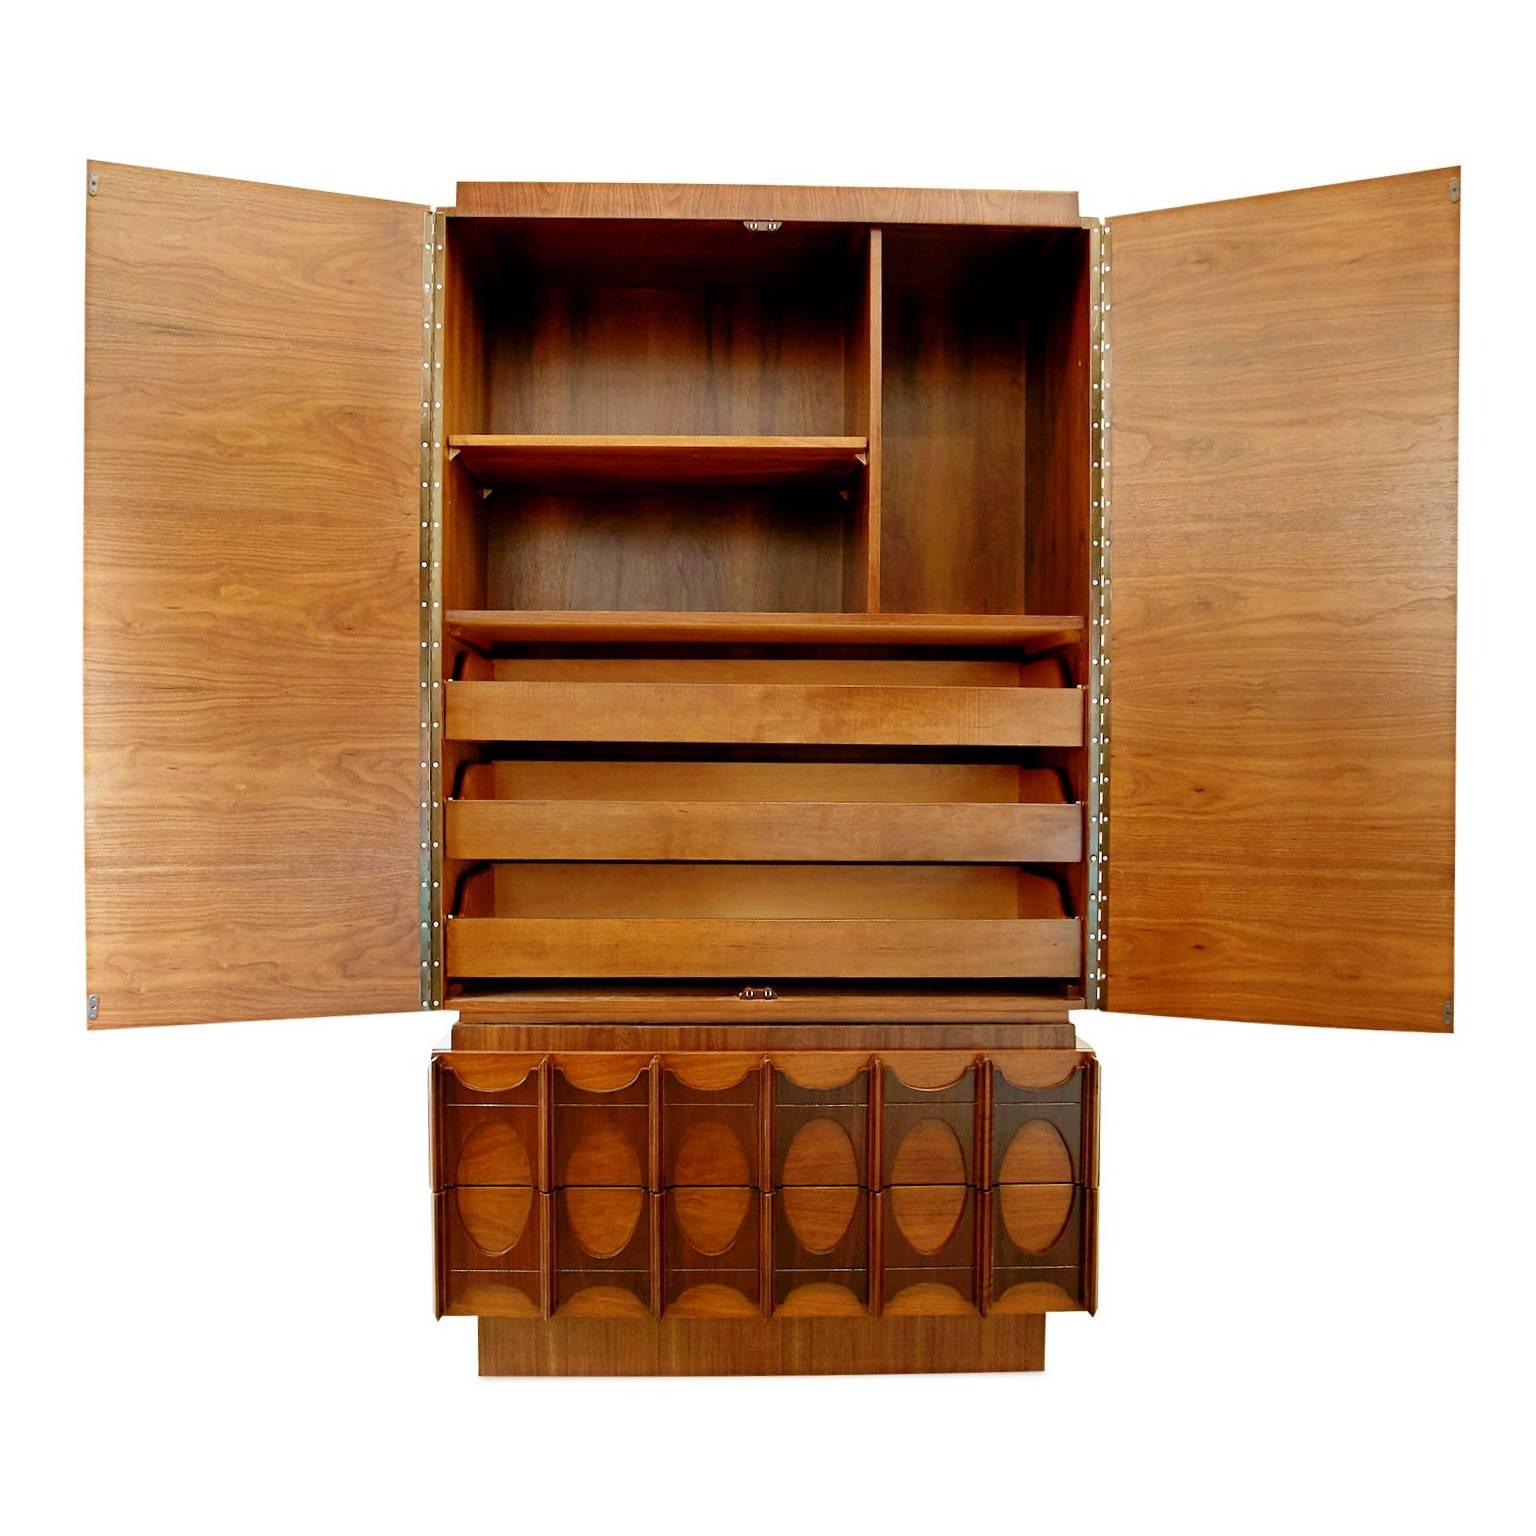 Substantial sized chest on chest in the style of Kent Coffey's Brasilia collection. This chifferobe is fabricated from walnut and has been newly refinished in two shades of rich brown. The body of this modern highboy has been finished with a lighter